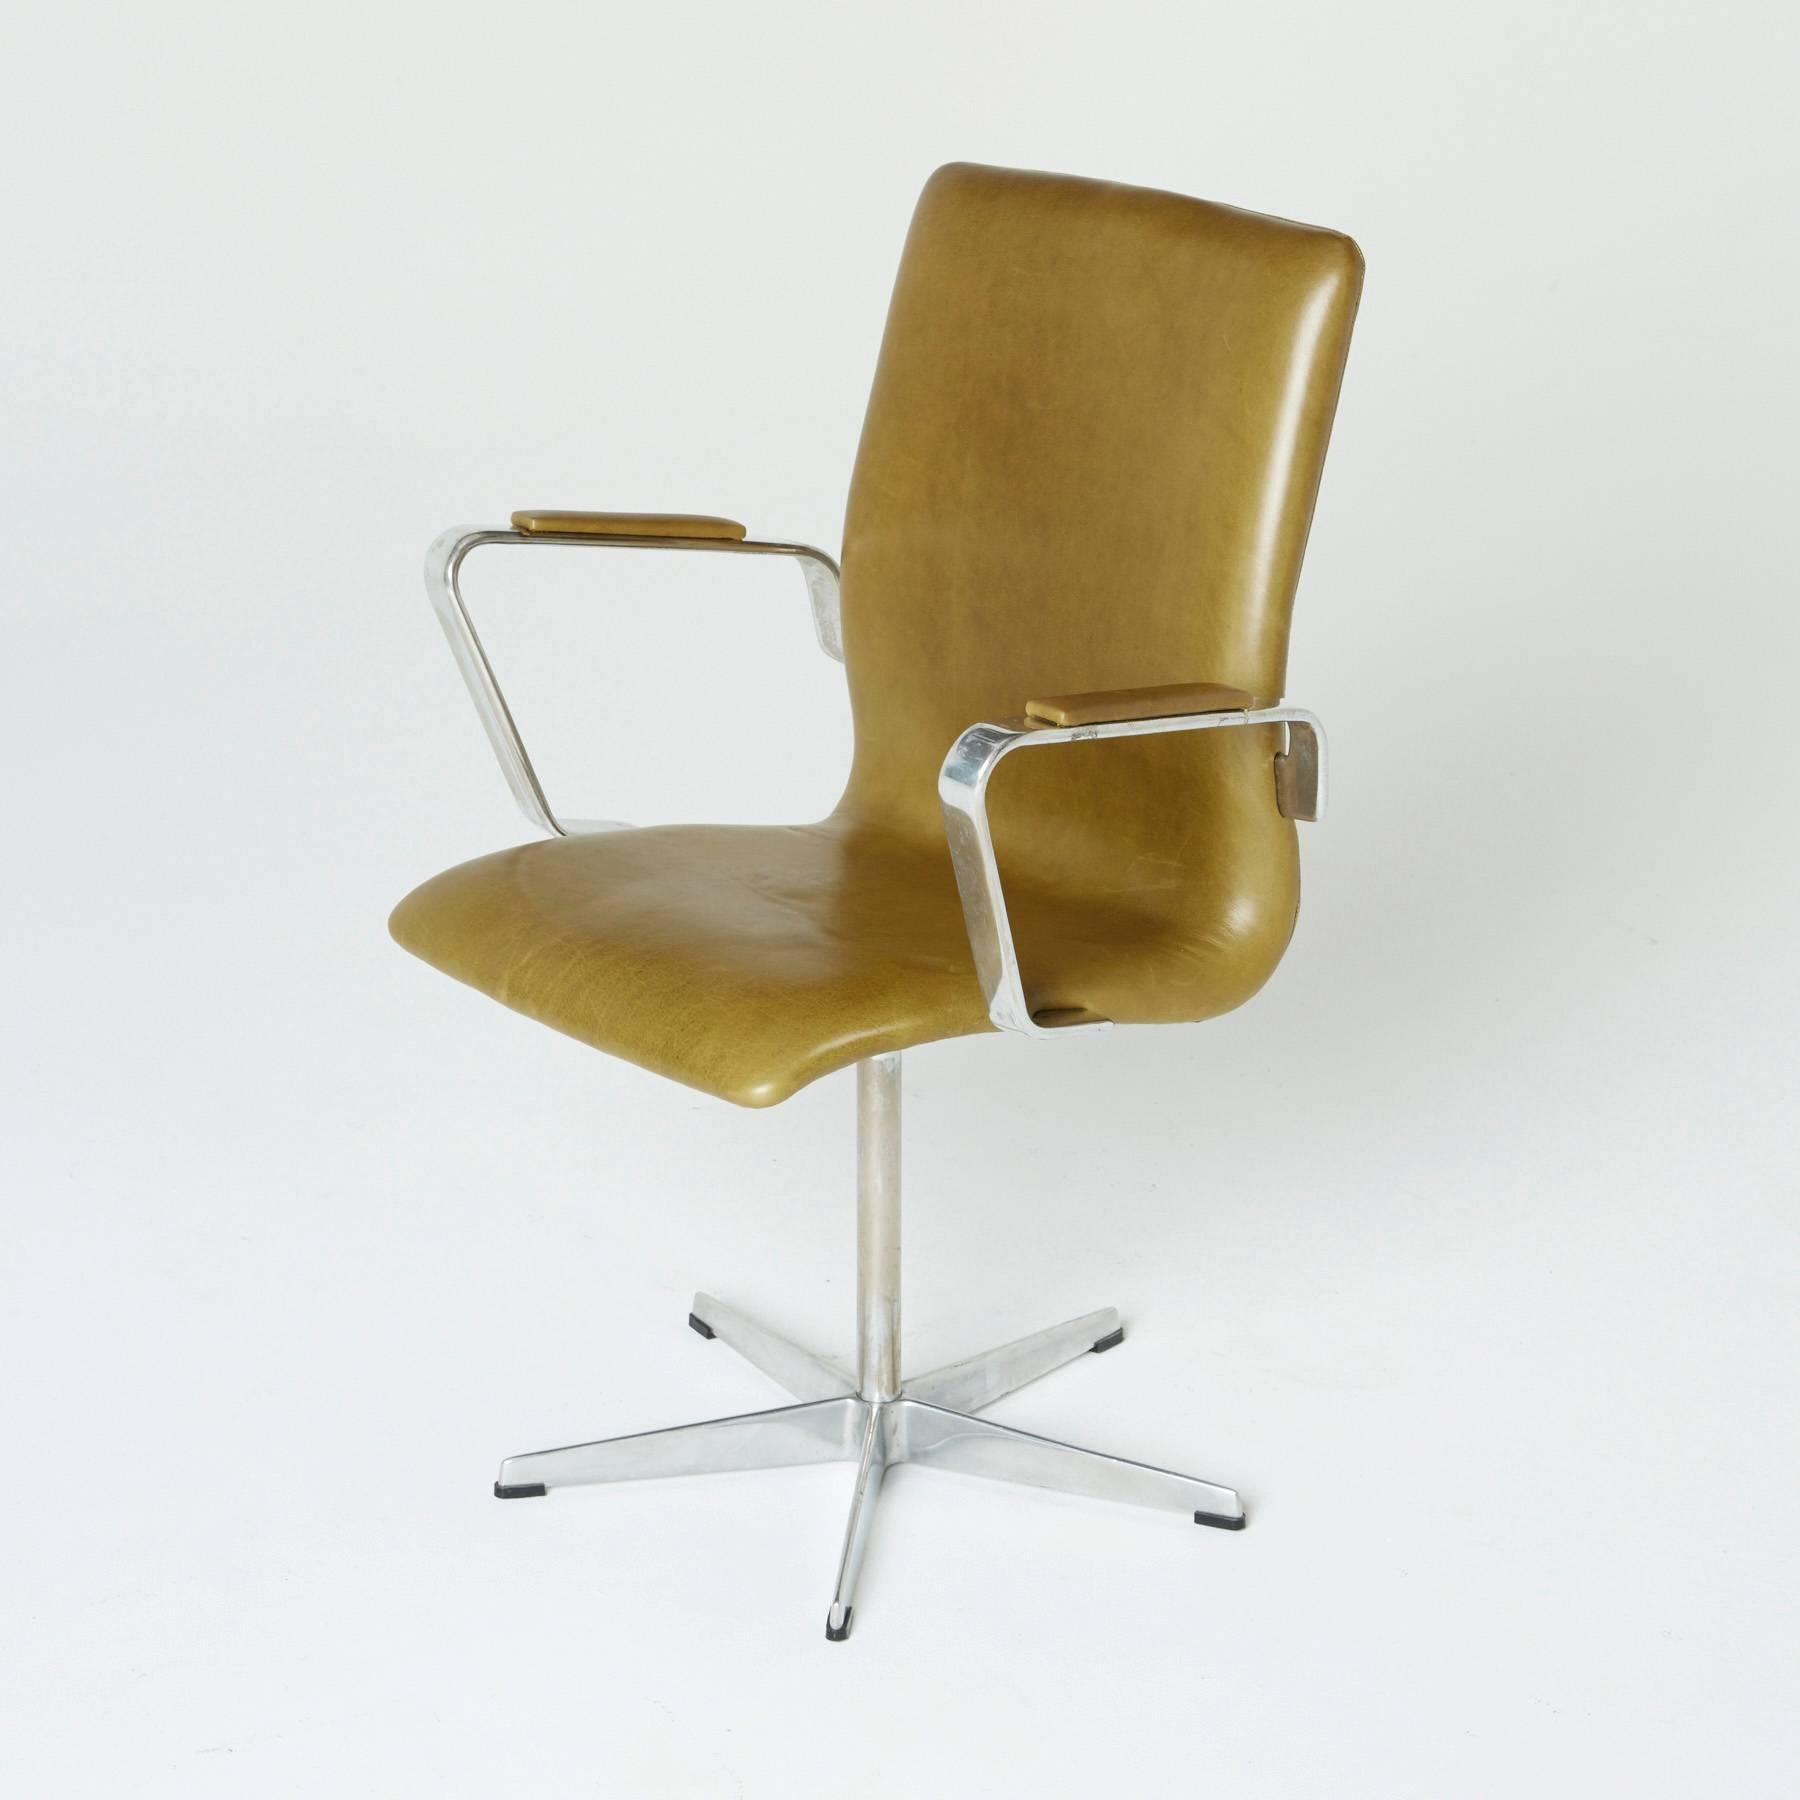 Danish Leather Oxford Swivel Chairs by Arne Jacobsen for Fritz Hansen, 1973, Signed